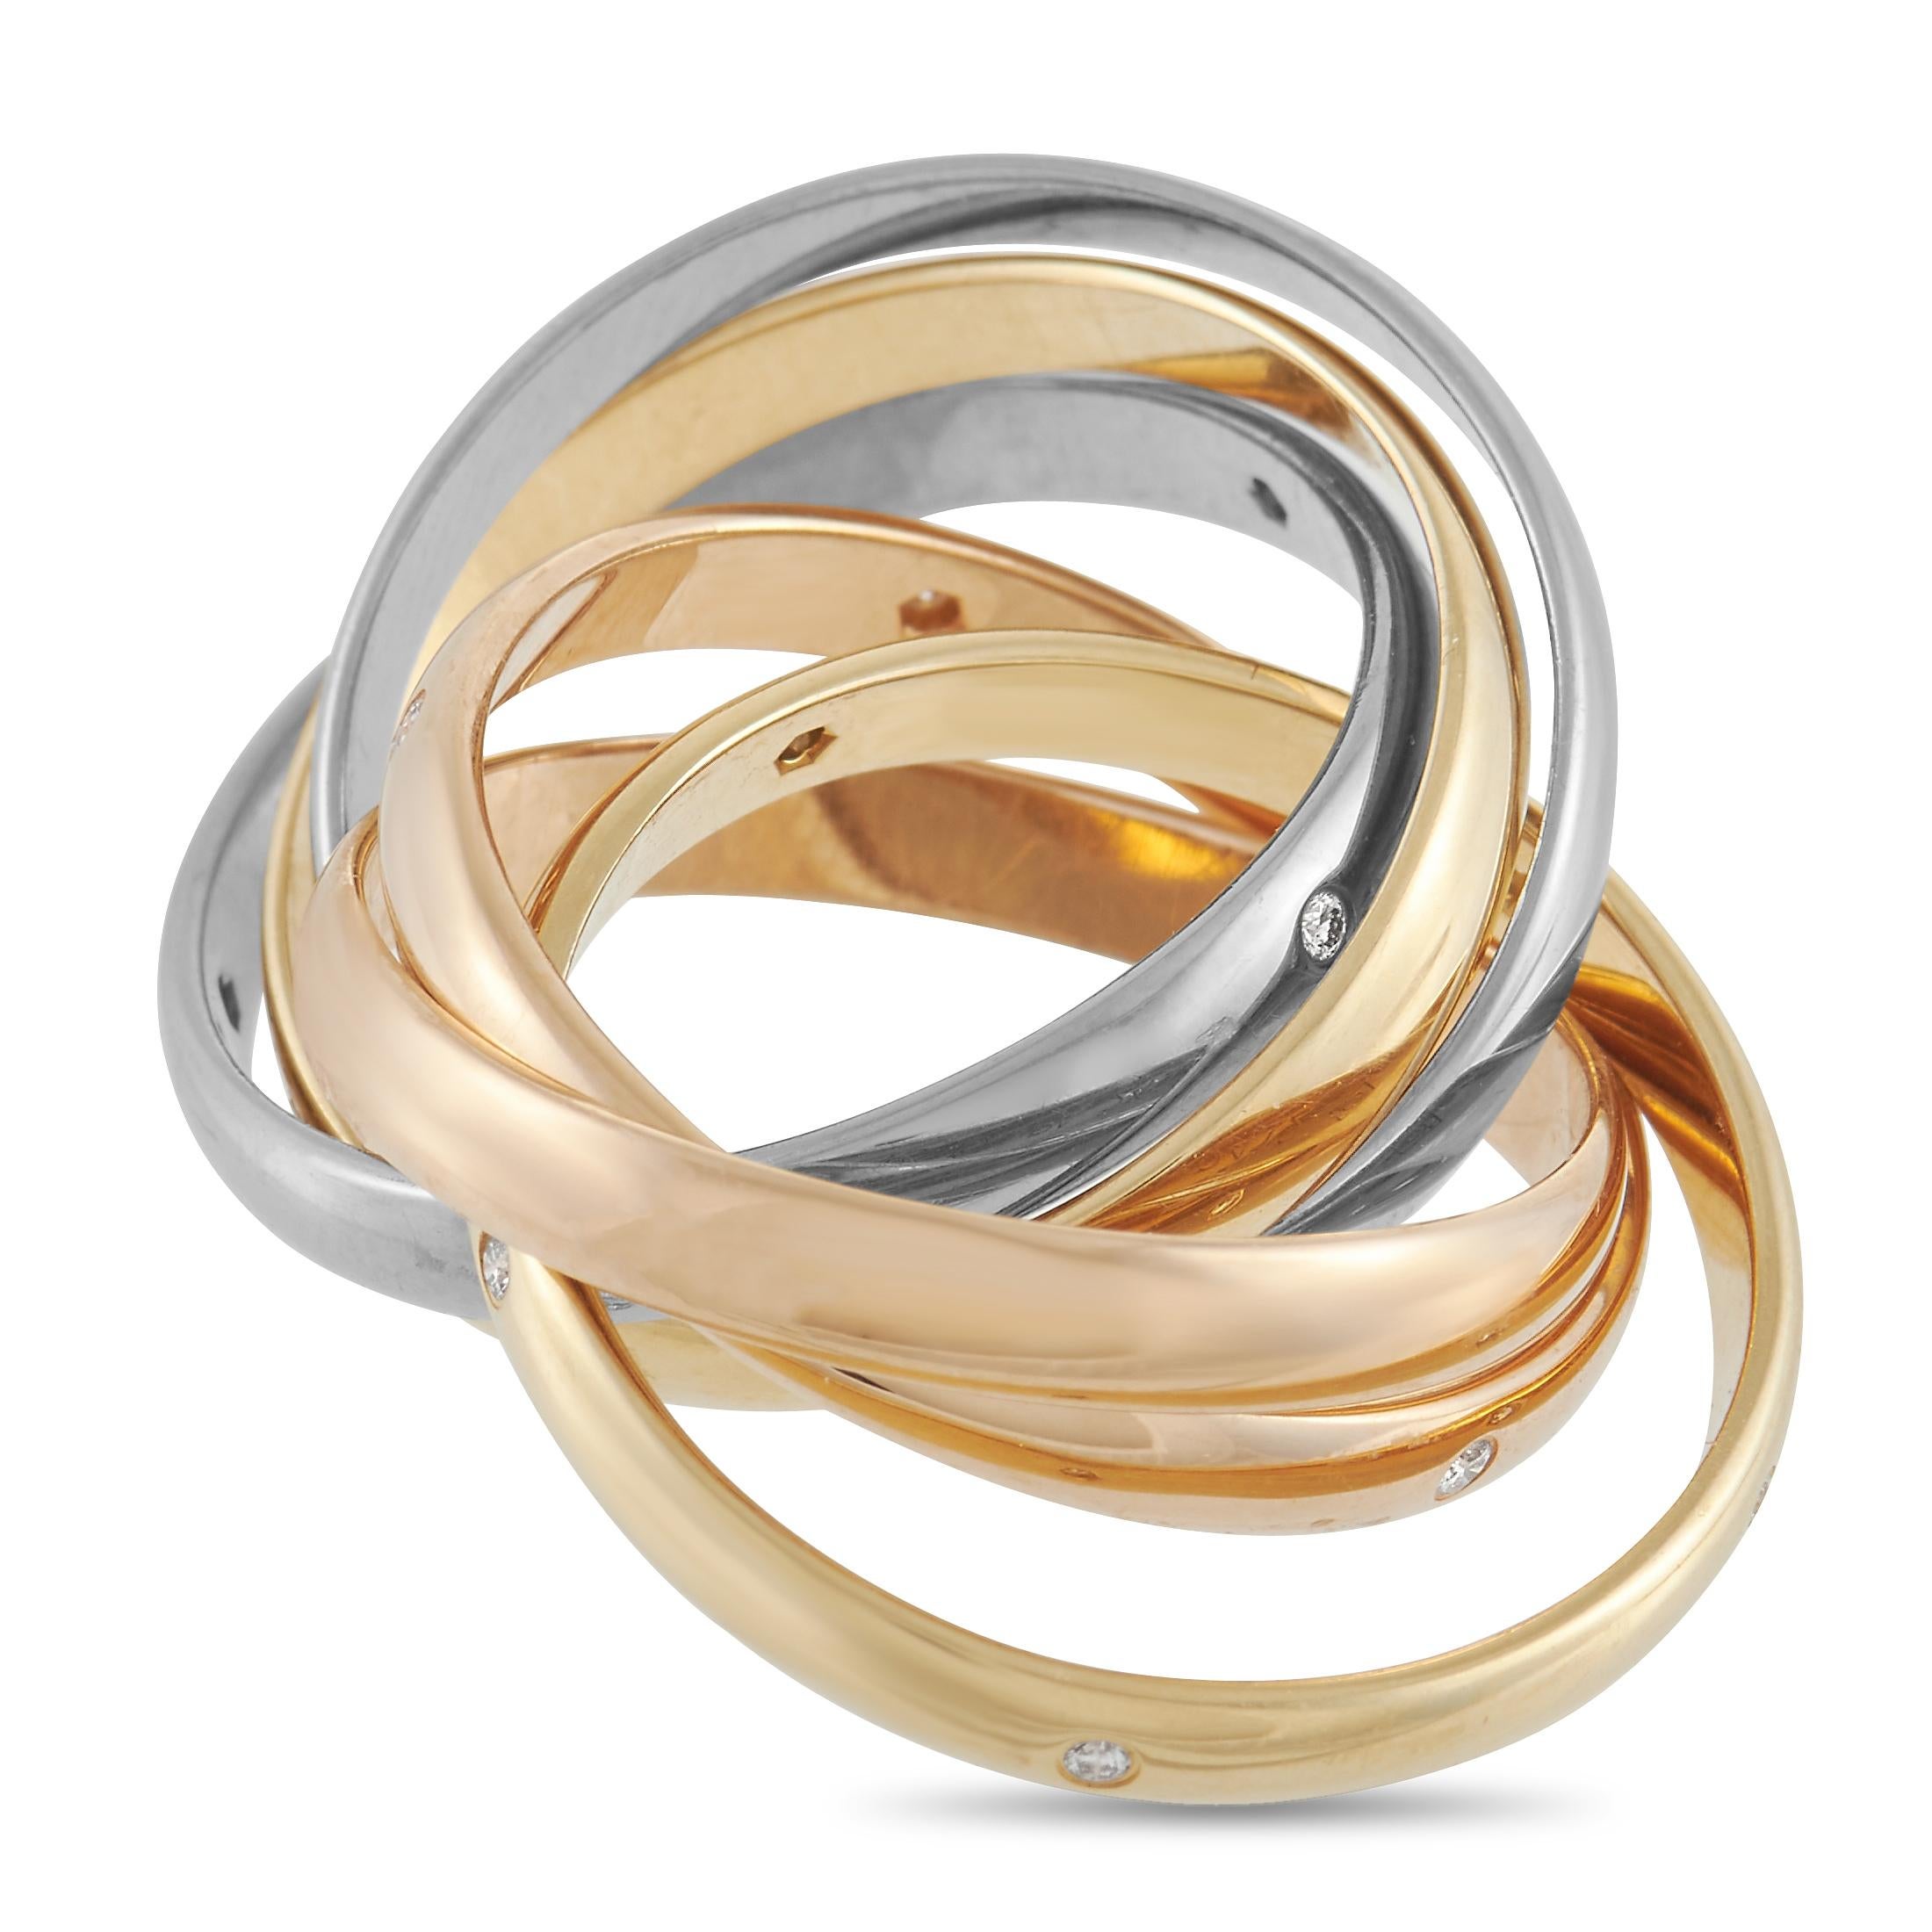 This exquisitely crafted ring from the Cartier Trinity collection is an intricate piece that will instantly capture your imagination. A total of 6 bands - made from 18K Yellow, White, and Rose Gold - come together to create this dynamic design,